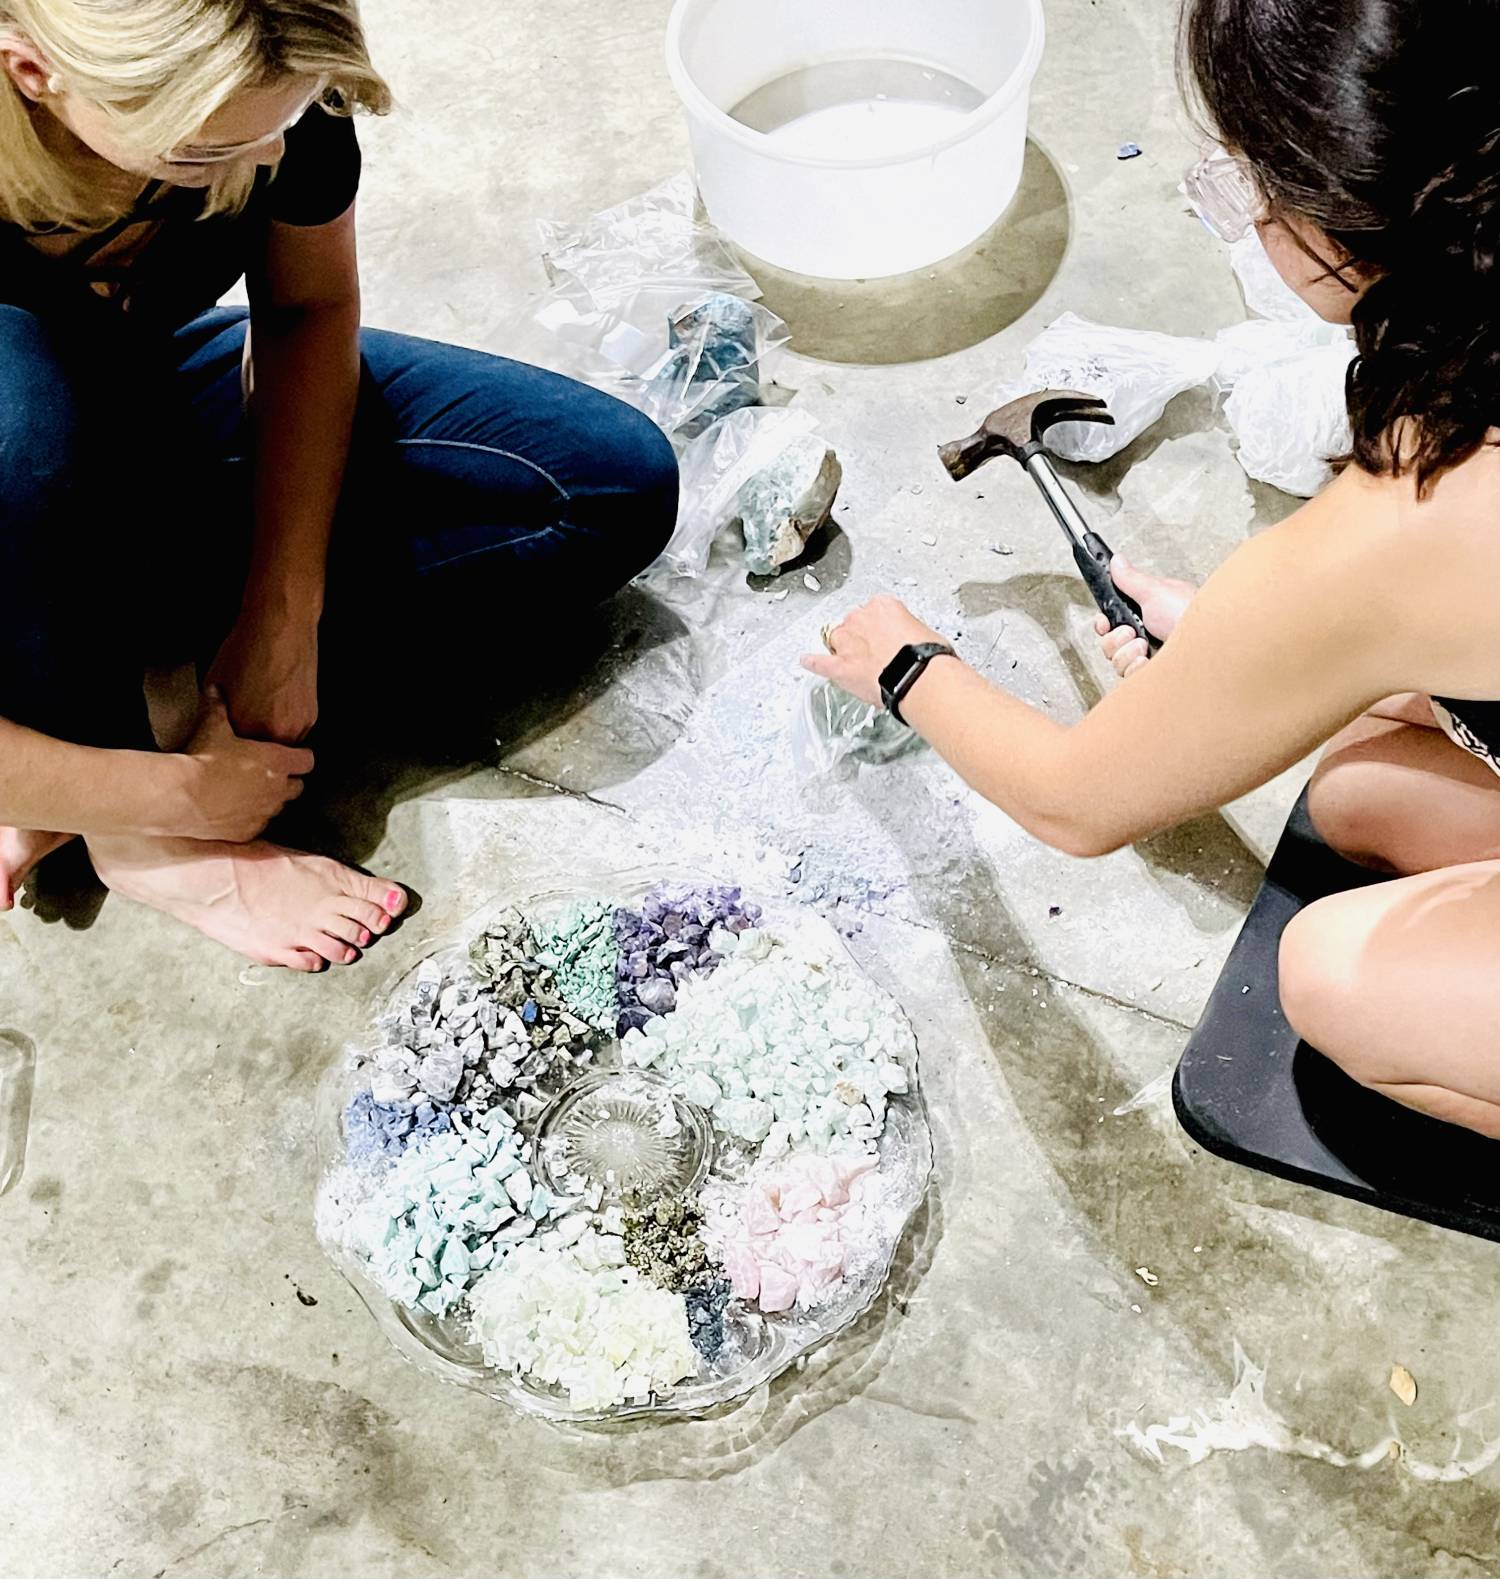 Photo of Tammy Campbell smashing gemstones with another person who is blonde and barefoot. They are both sitting on the floor next to a platter of smashed gemstones.